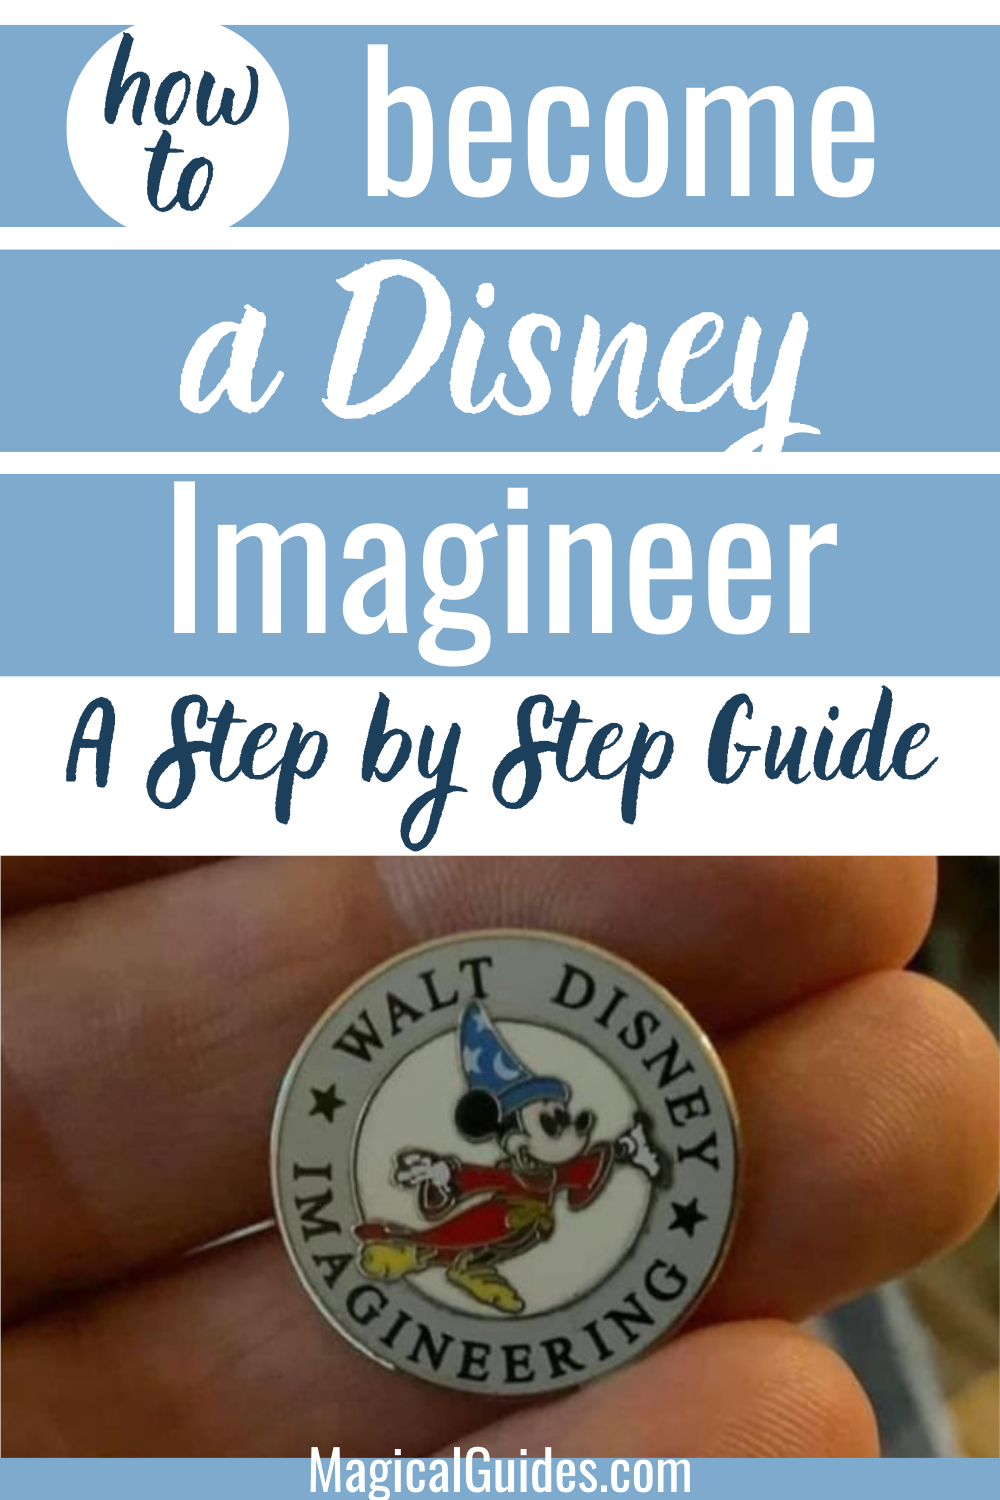 If you have ever wanted to become a Disney Imagineer check out this guide to get you started on your future career.